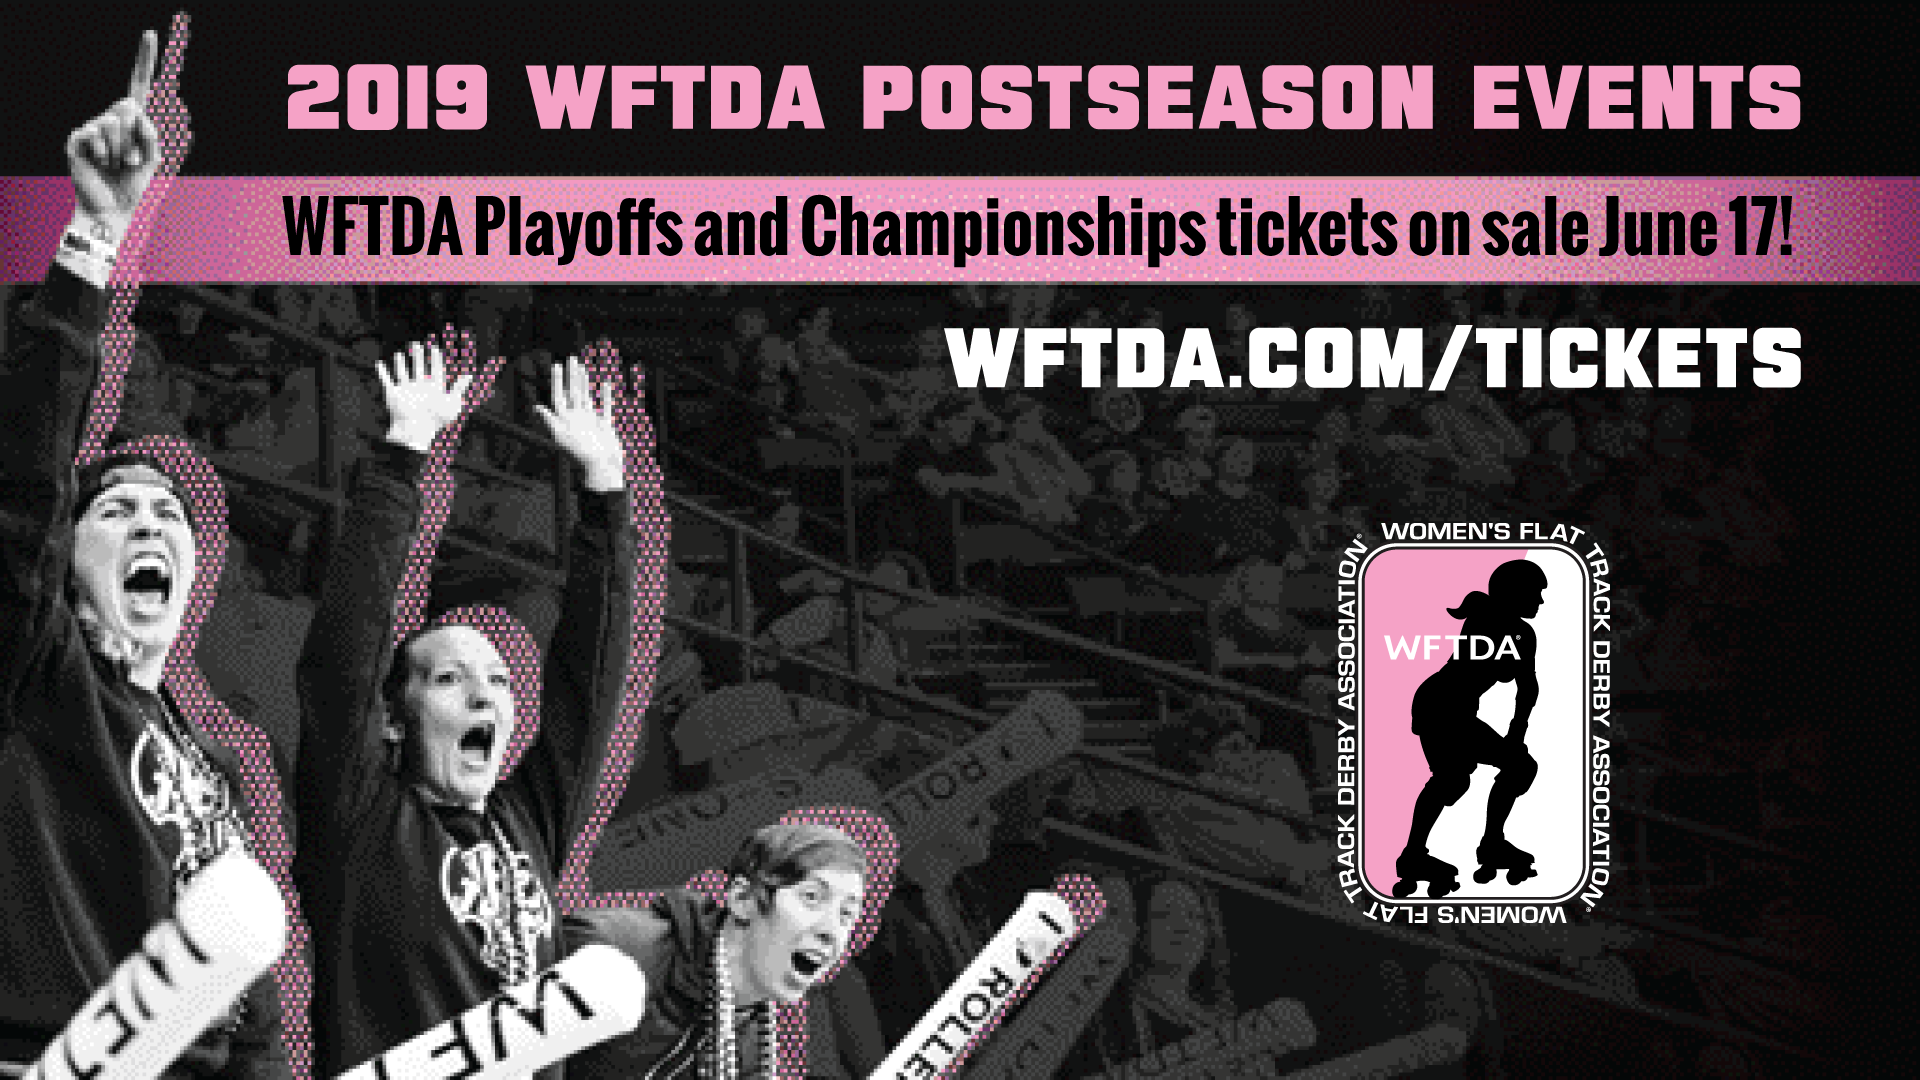 Tickets for the 2019 WFTDA Postseason Tournaments Go on Sale June 17!